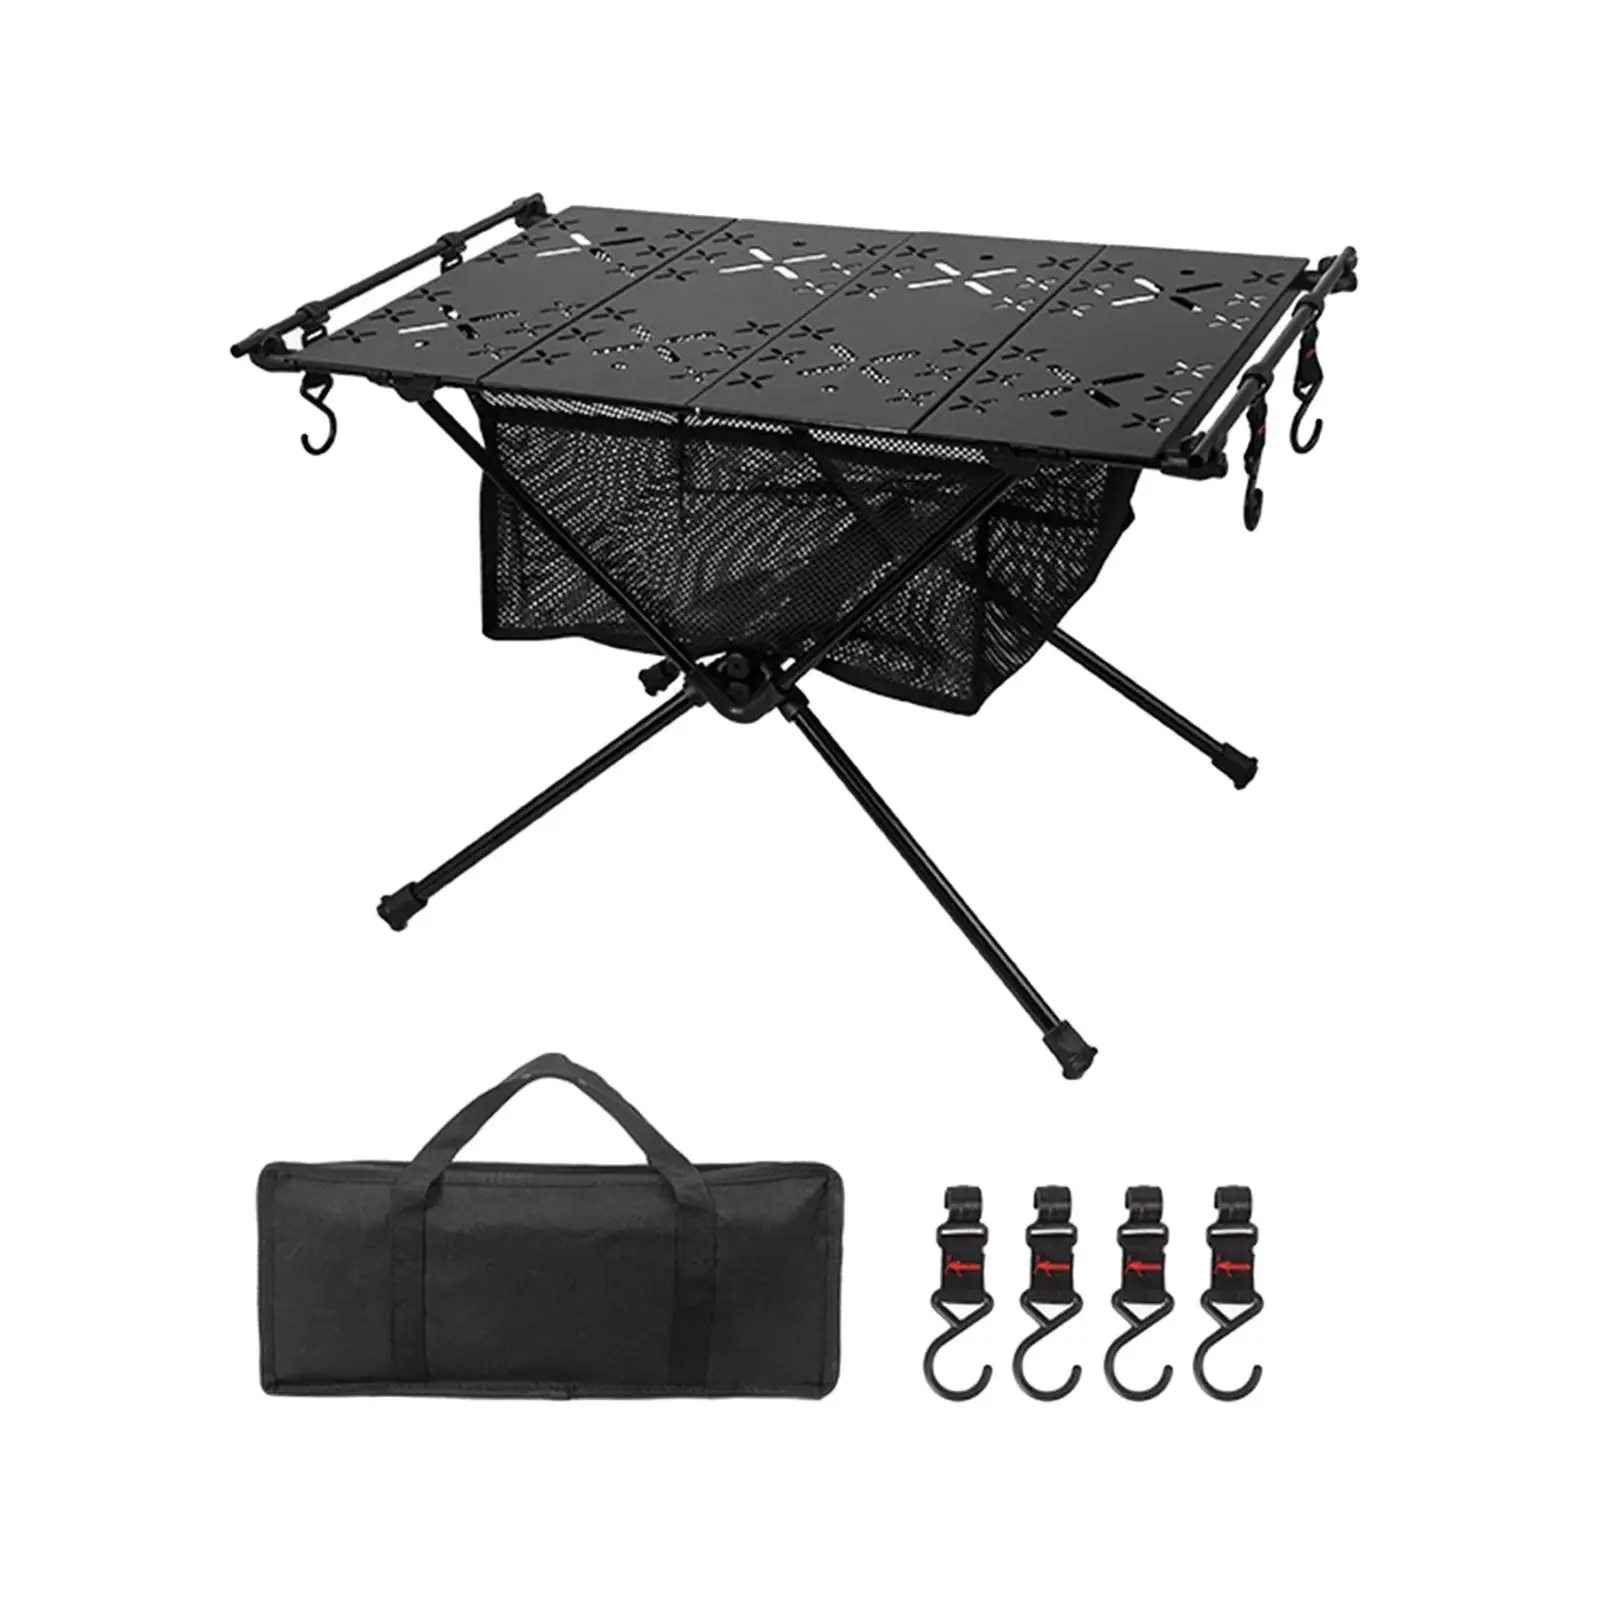 Folding Camping Table with Storage Bag Outdoor Foldable Table Camping Desk for Picnic Patio Travel Fishing Hiking